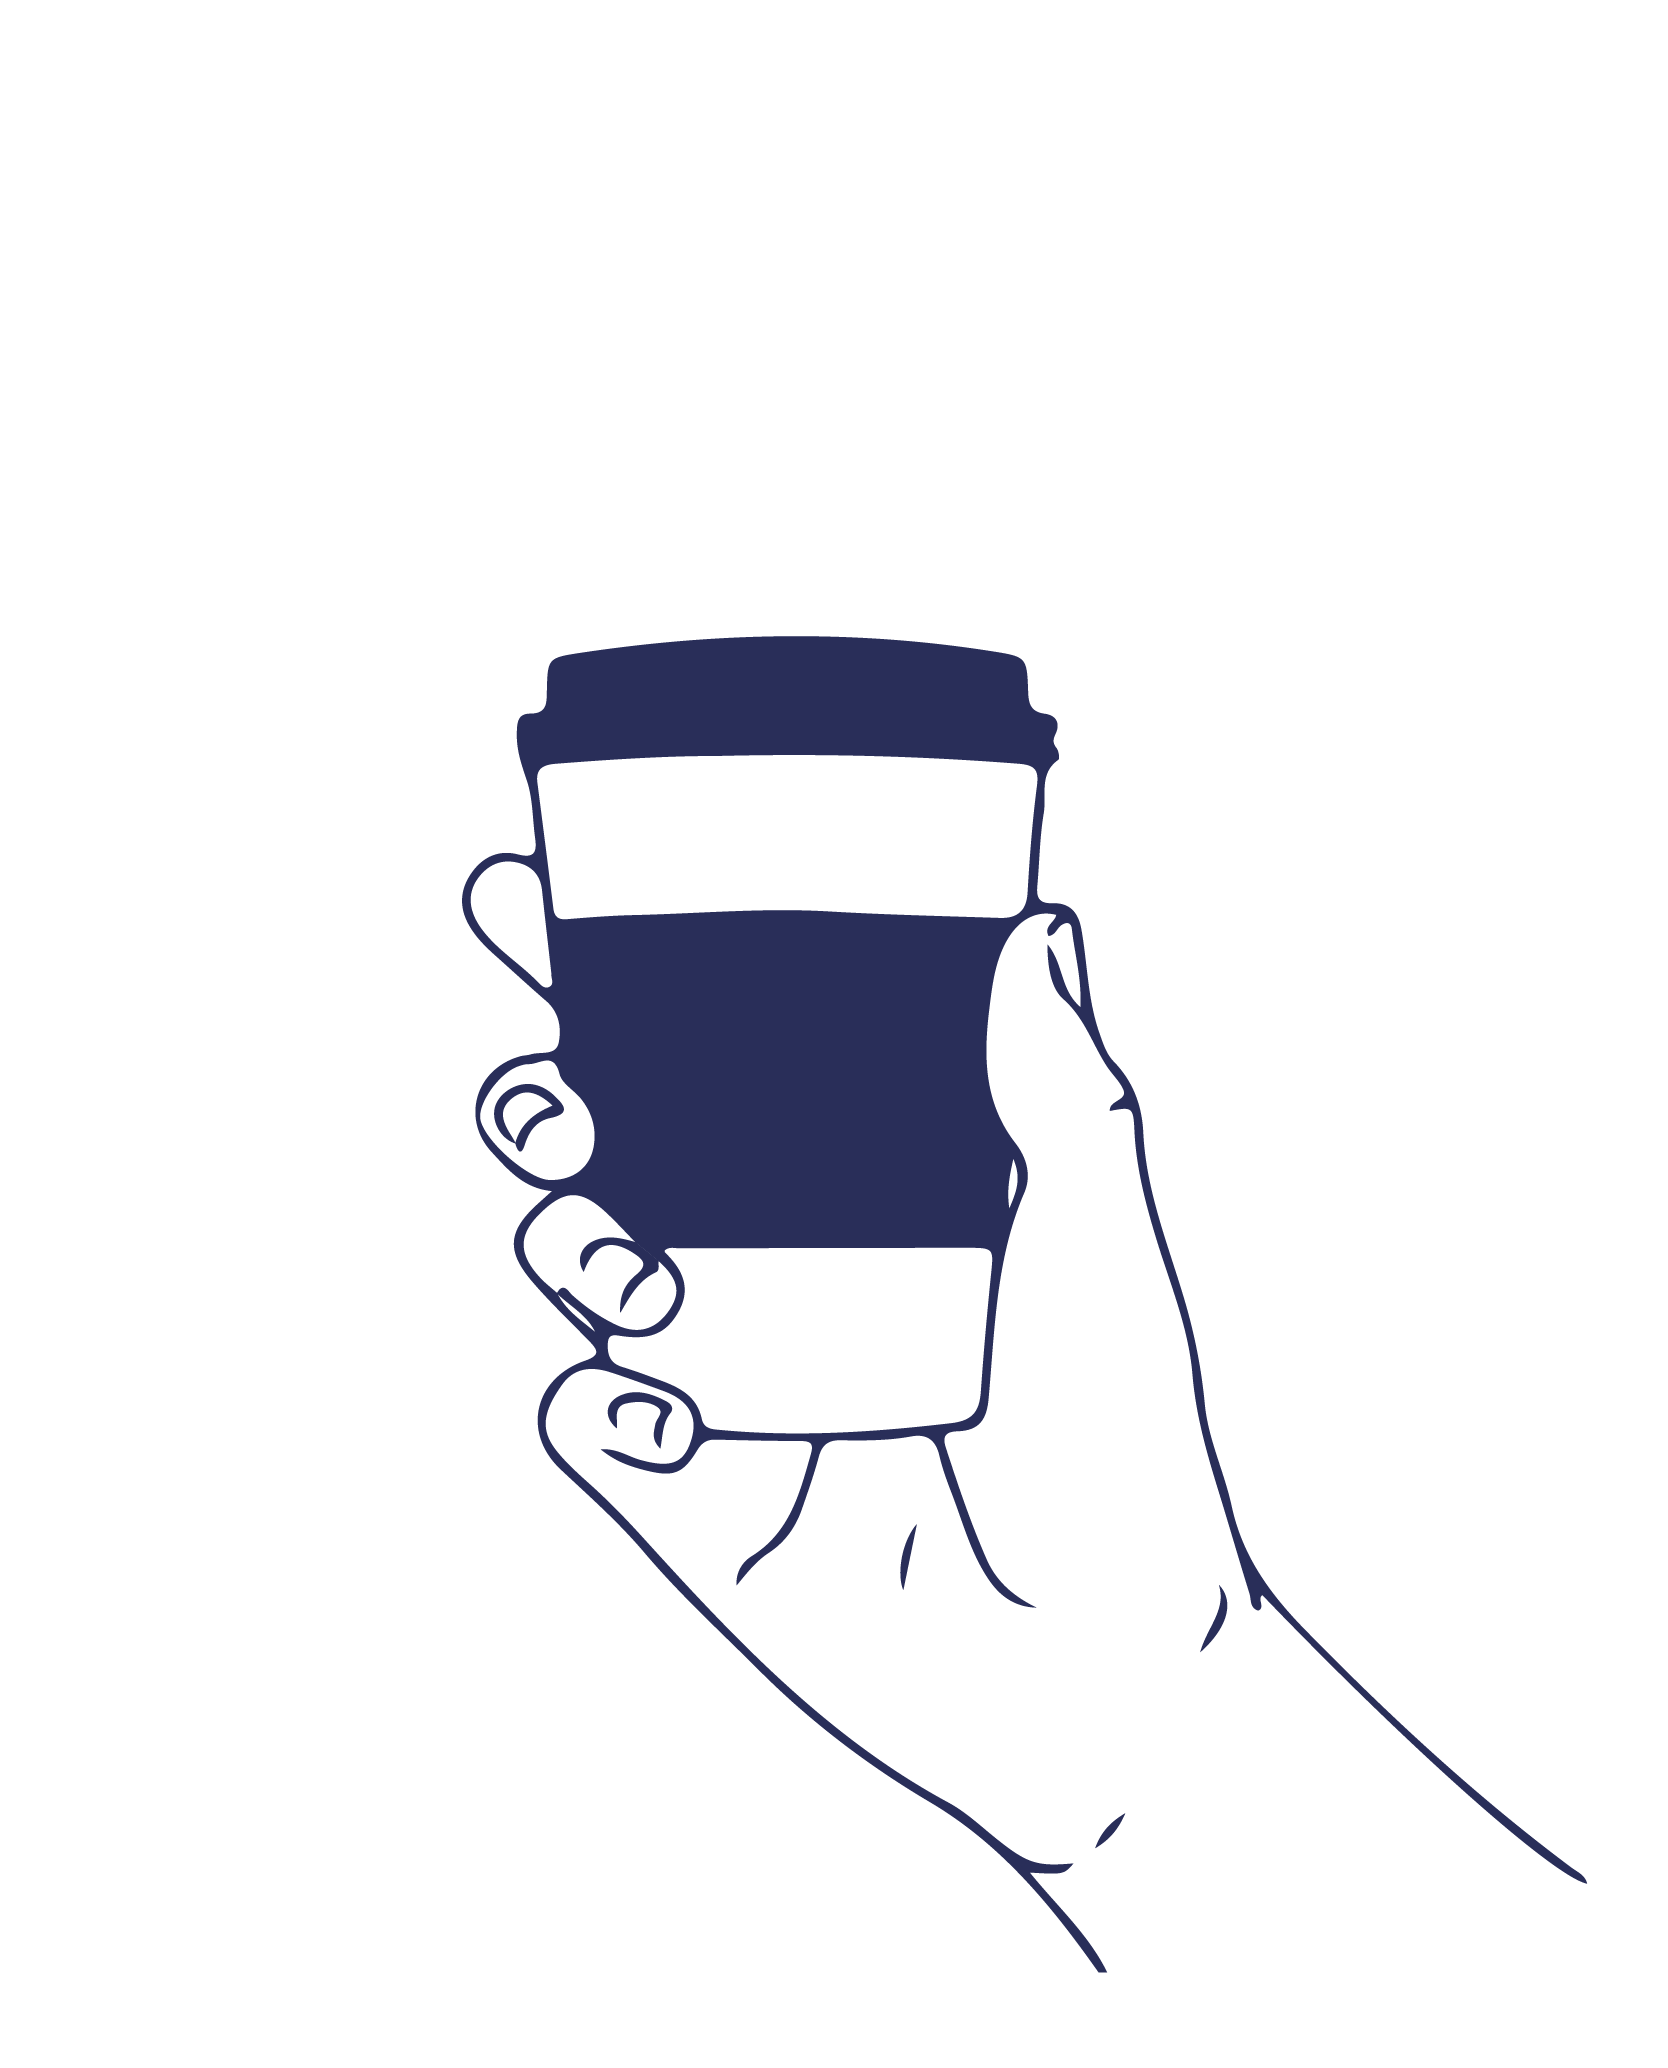 Illustration of hand holding takeaway coffee cup